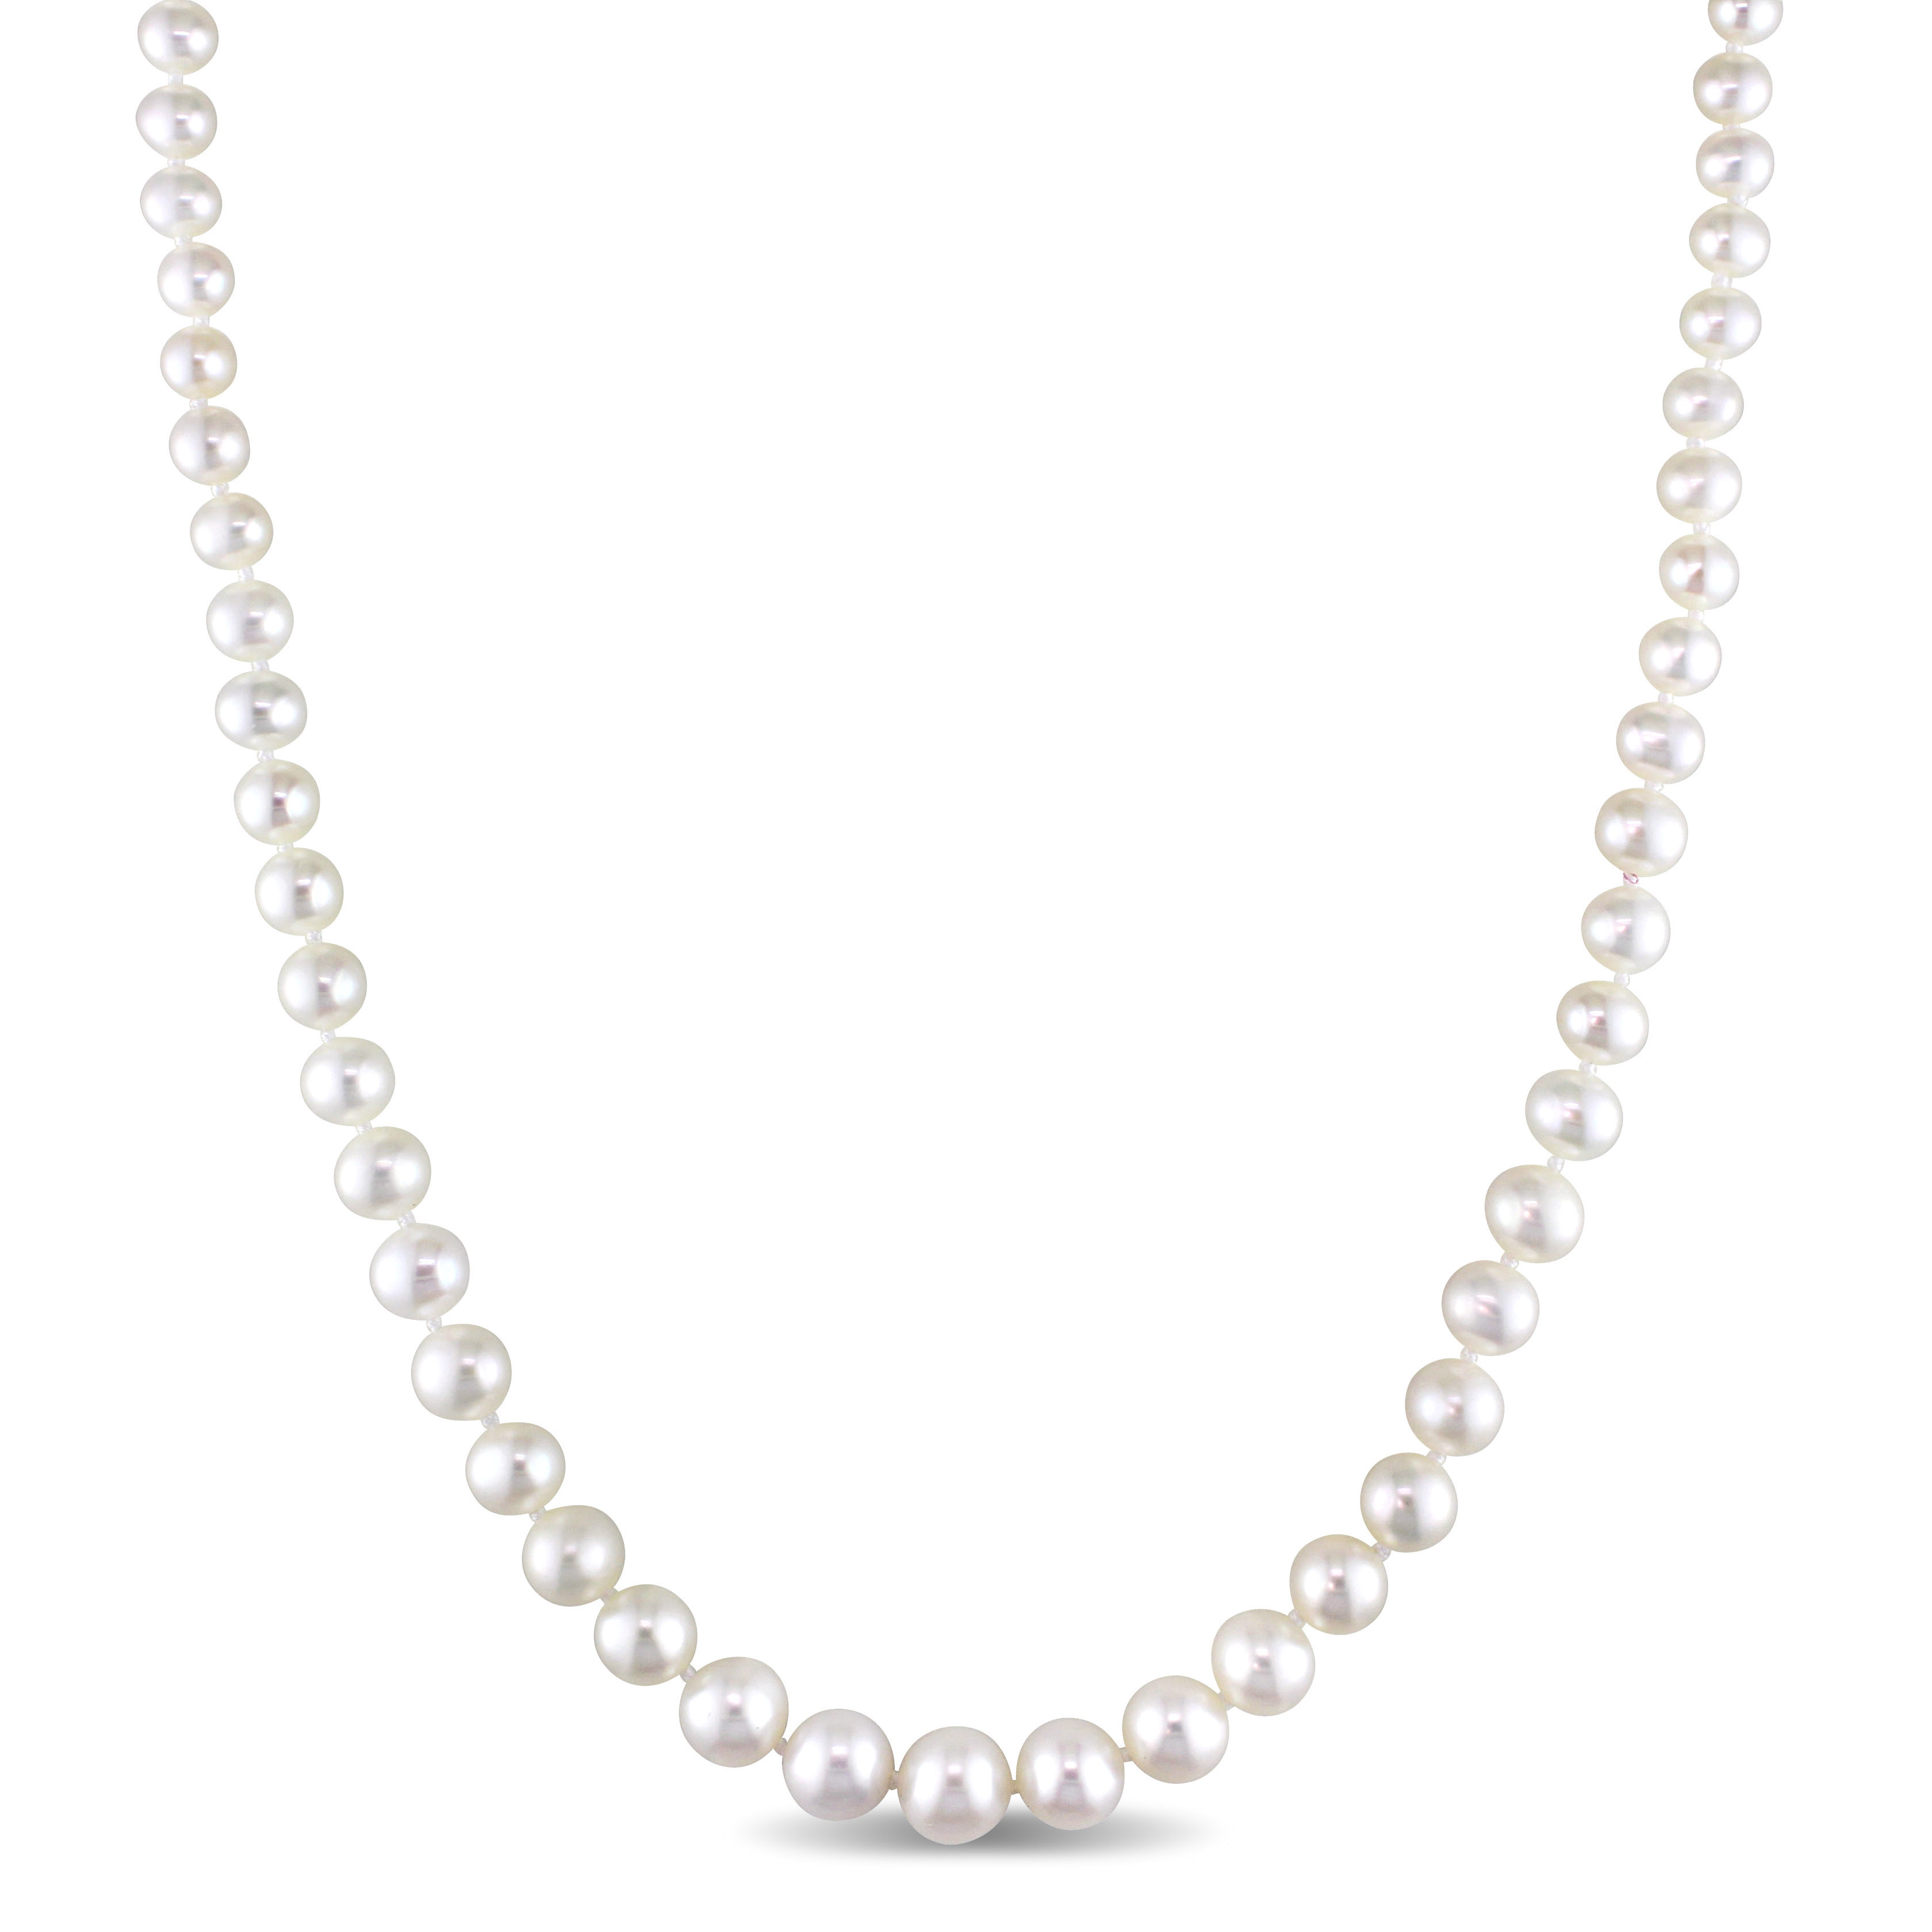 4-8mm Freshwater Pearl Strand Graduated Necklace with 14k Yellow Gold Clasp - 18 in